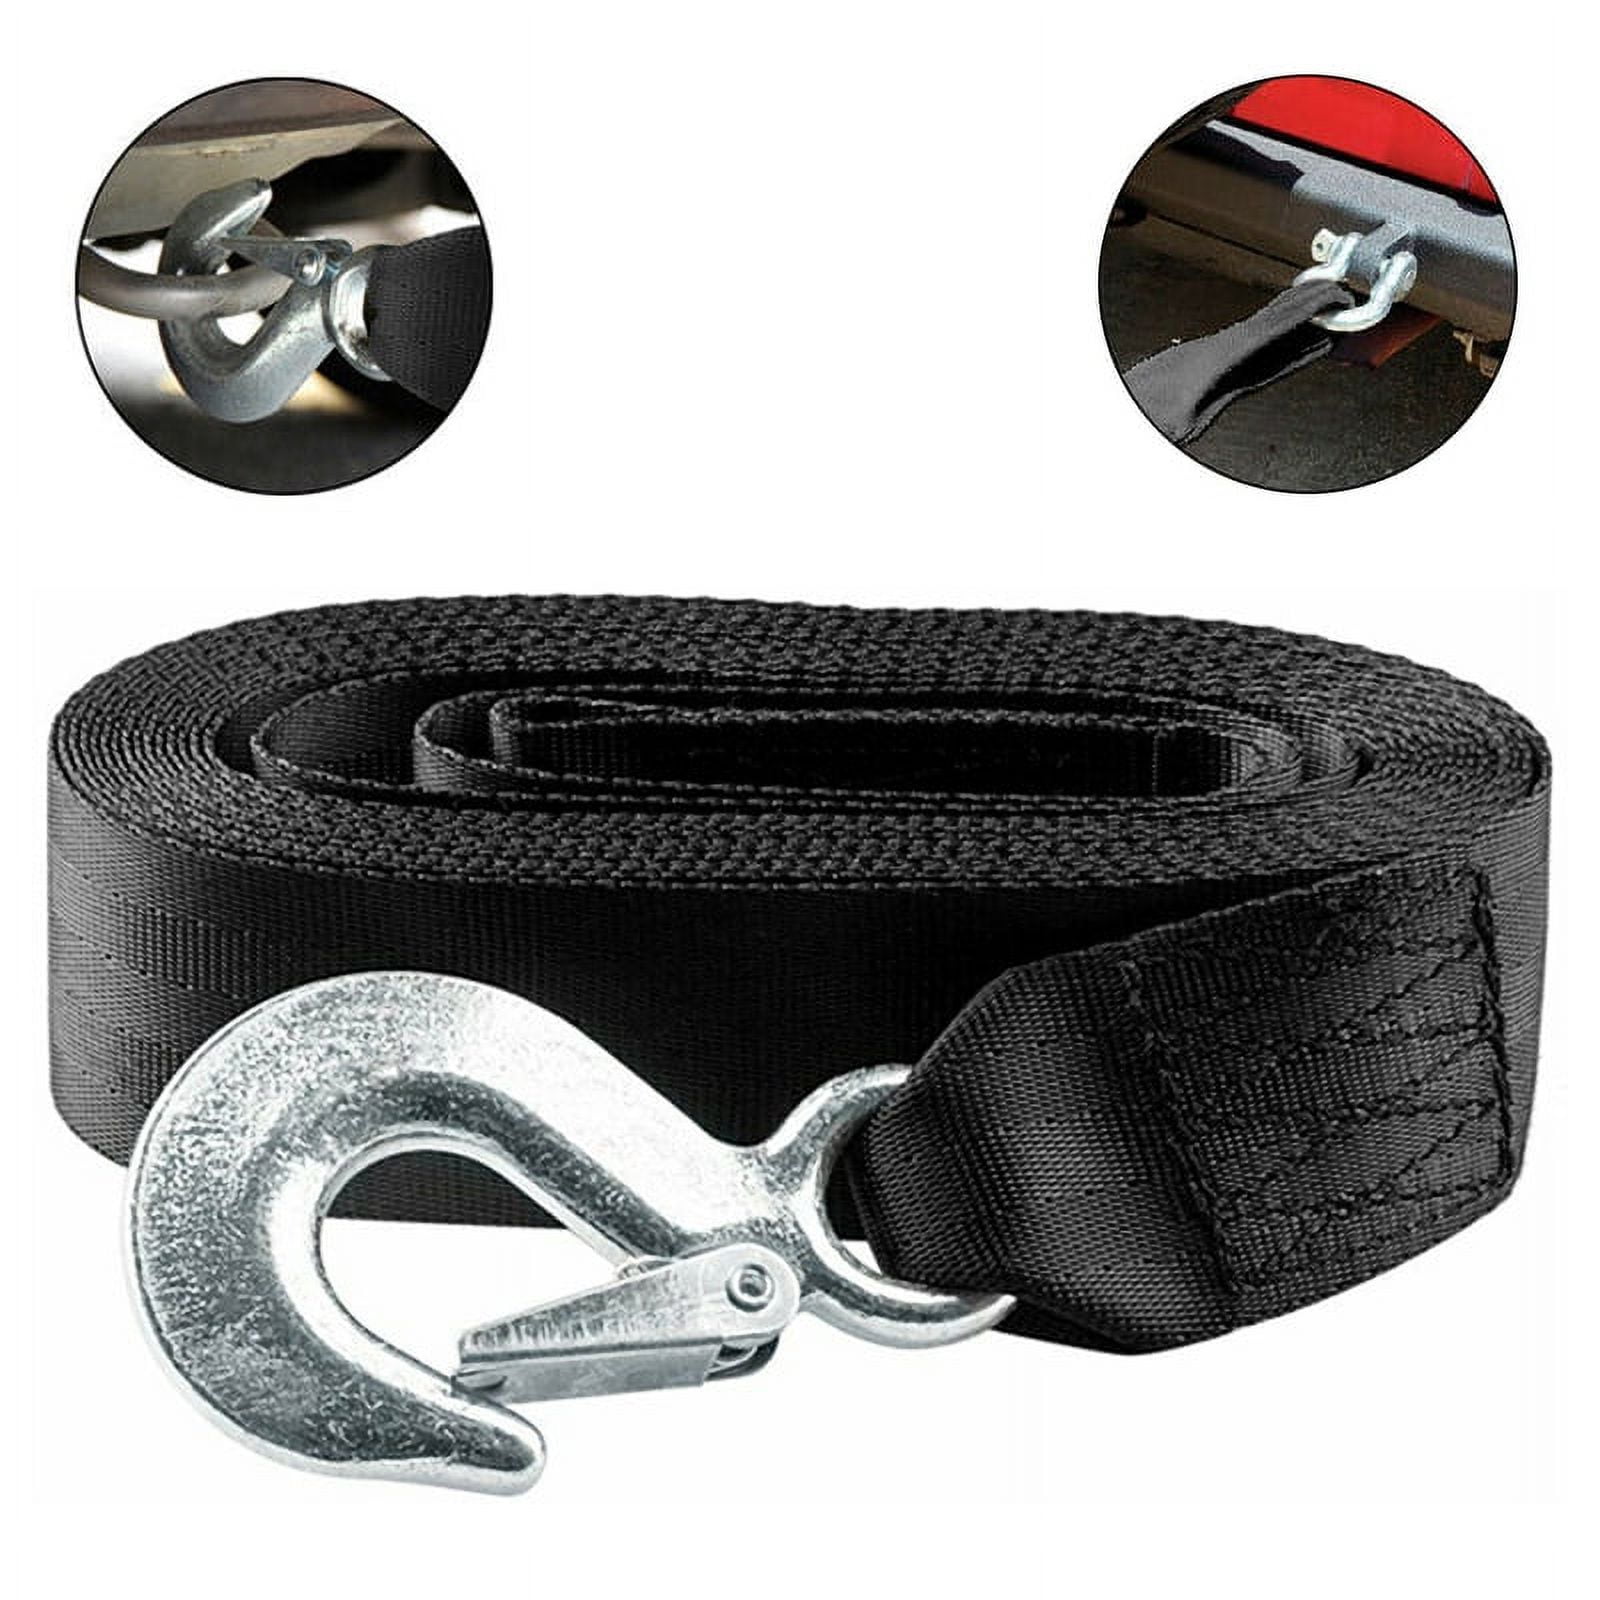 Boat Winch Strap with Hook,Winch Strap for Boat Trailer,Boat Trailer Winch  Strap 2 inch x 20 Foot, Great for Boat, Truck, Jet Ski and Car Trailers